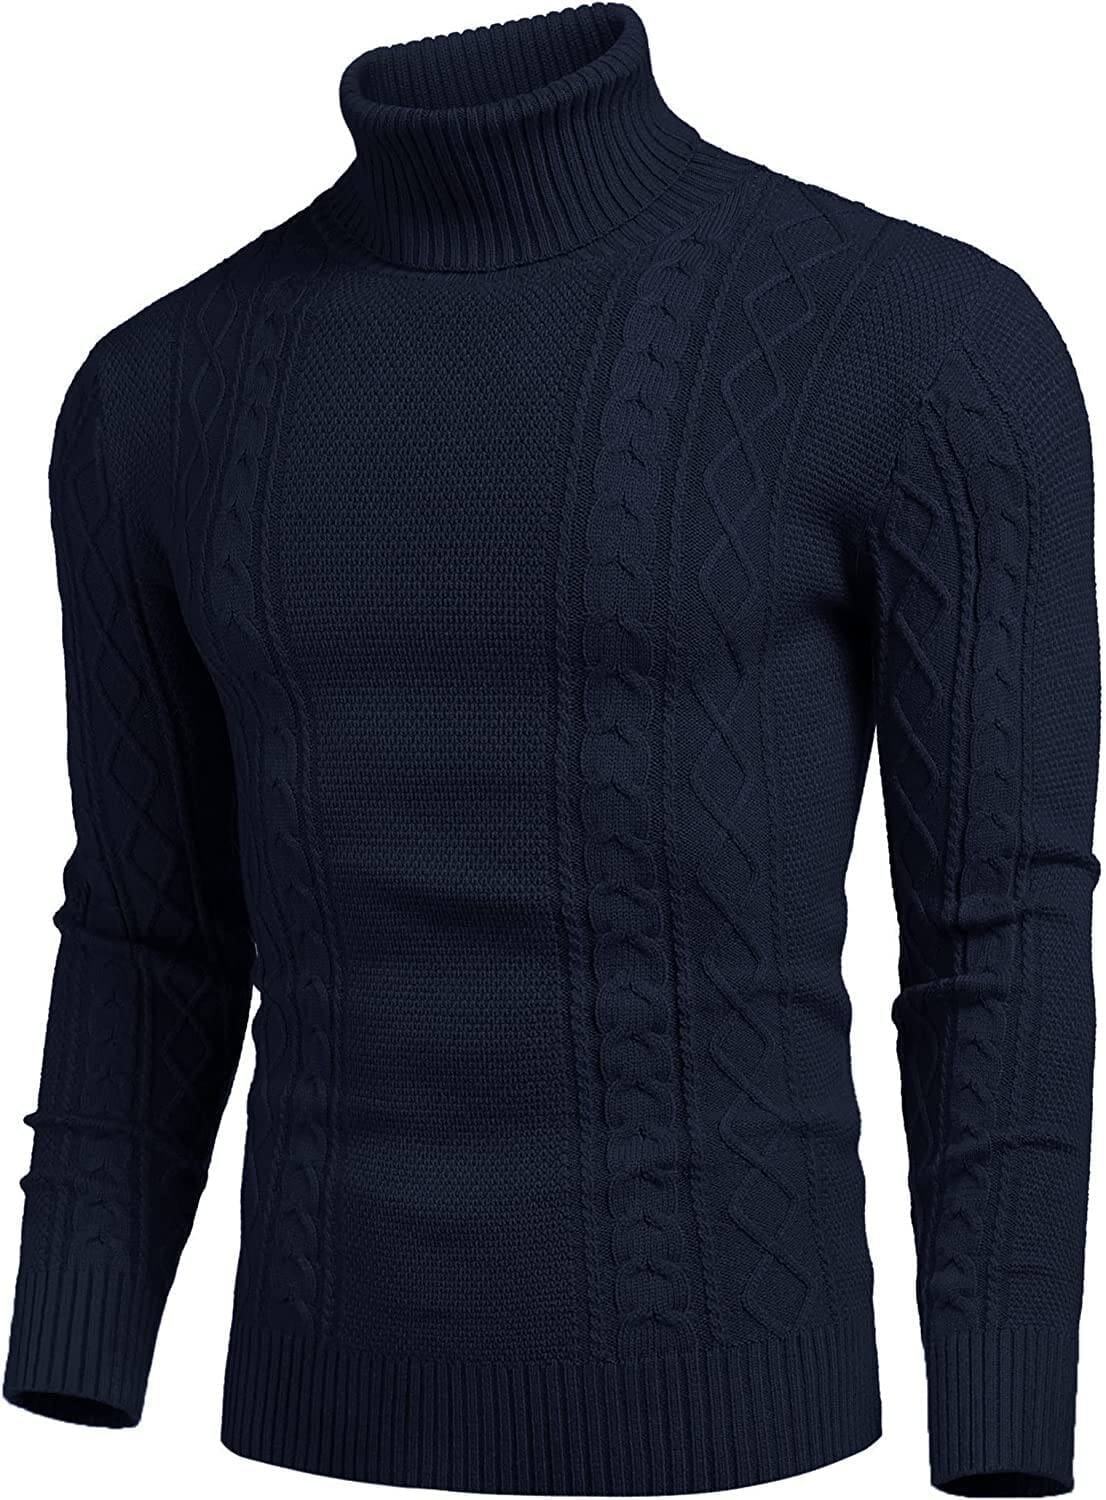 Turtleneck Casual Cable Knitted Pullover Sweaters (US Only) Fashion Hoodies & Sweatshirts COOFANDY Store 